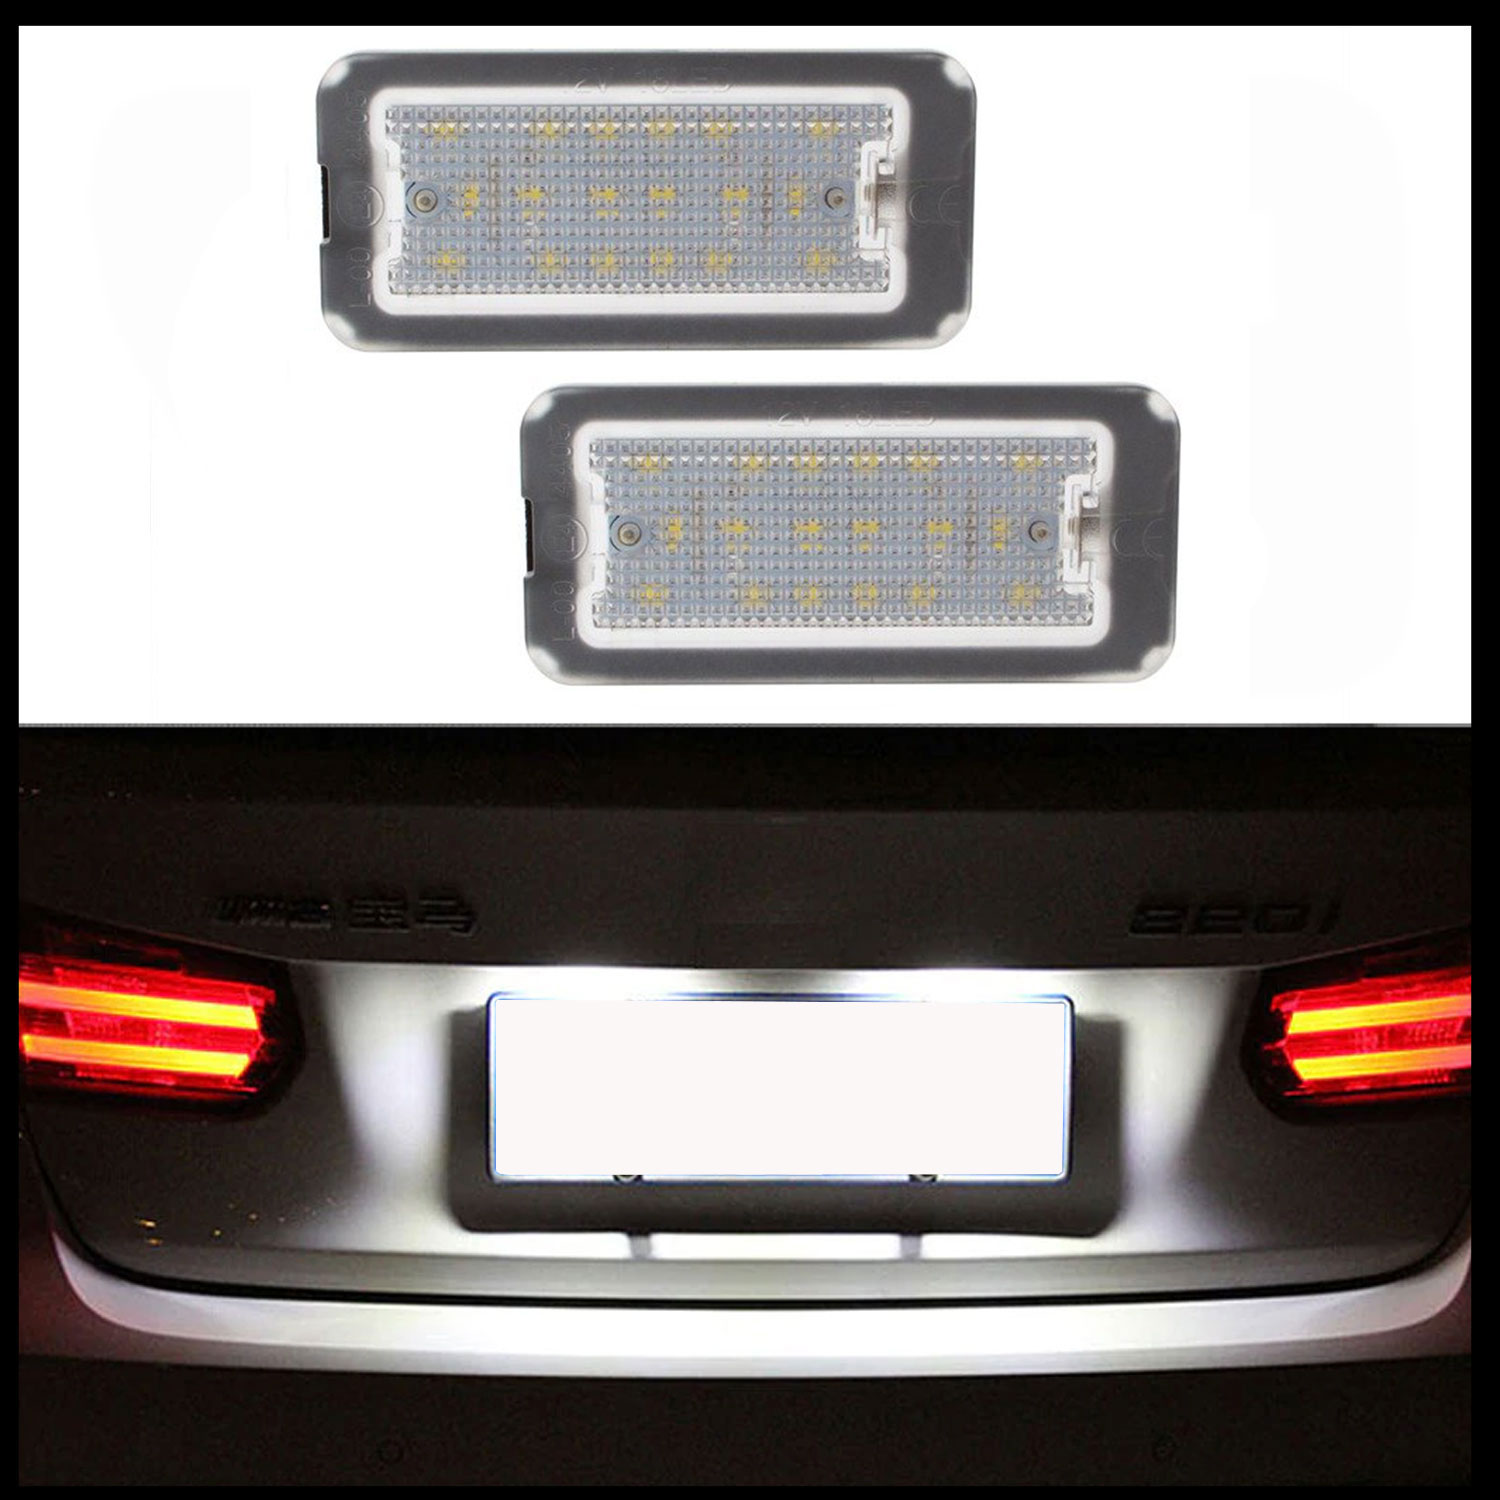 2x LED License Plate Light Module For Fiat 500 500C Cabriolet Canbus Error Free